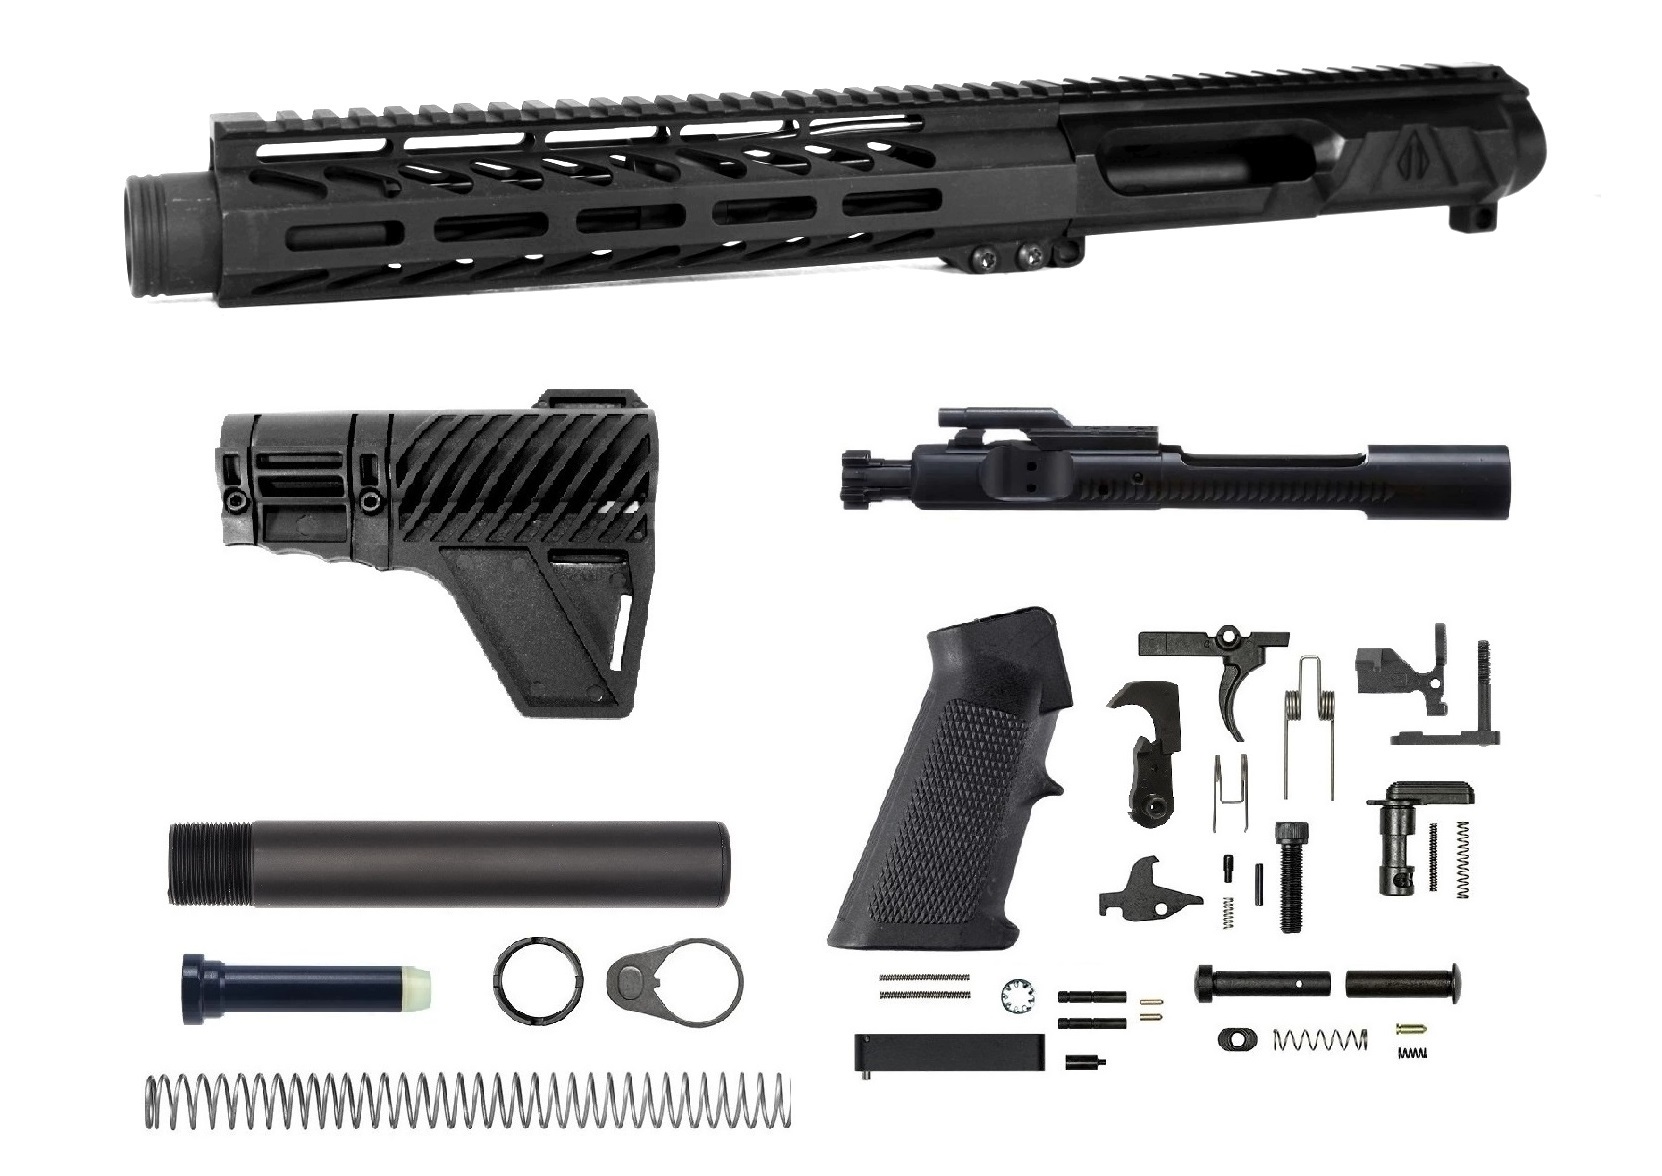 8 inch AR-15 LEFT HANDED NR Side Charging 5.56 NATO Melonite Upper w/Can Complete Kit | Fast Shipping